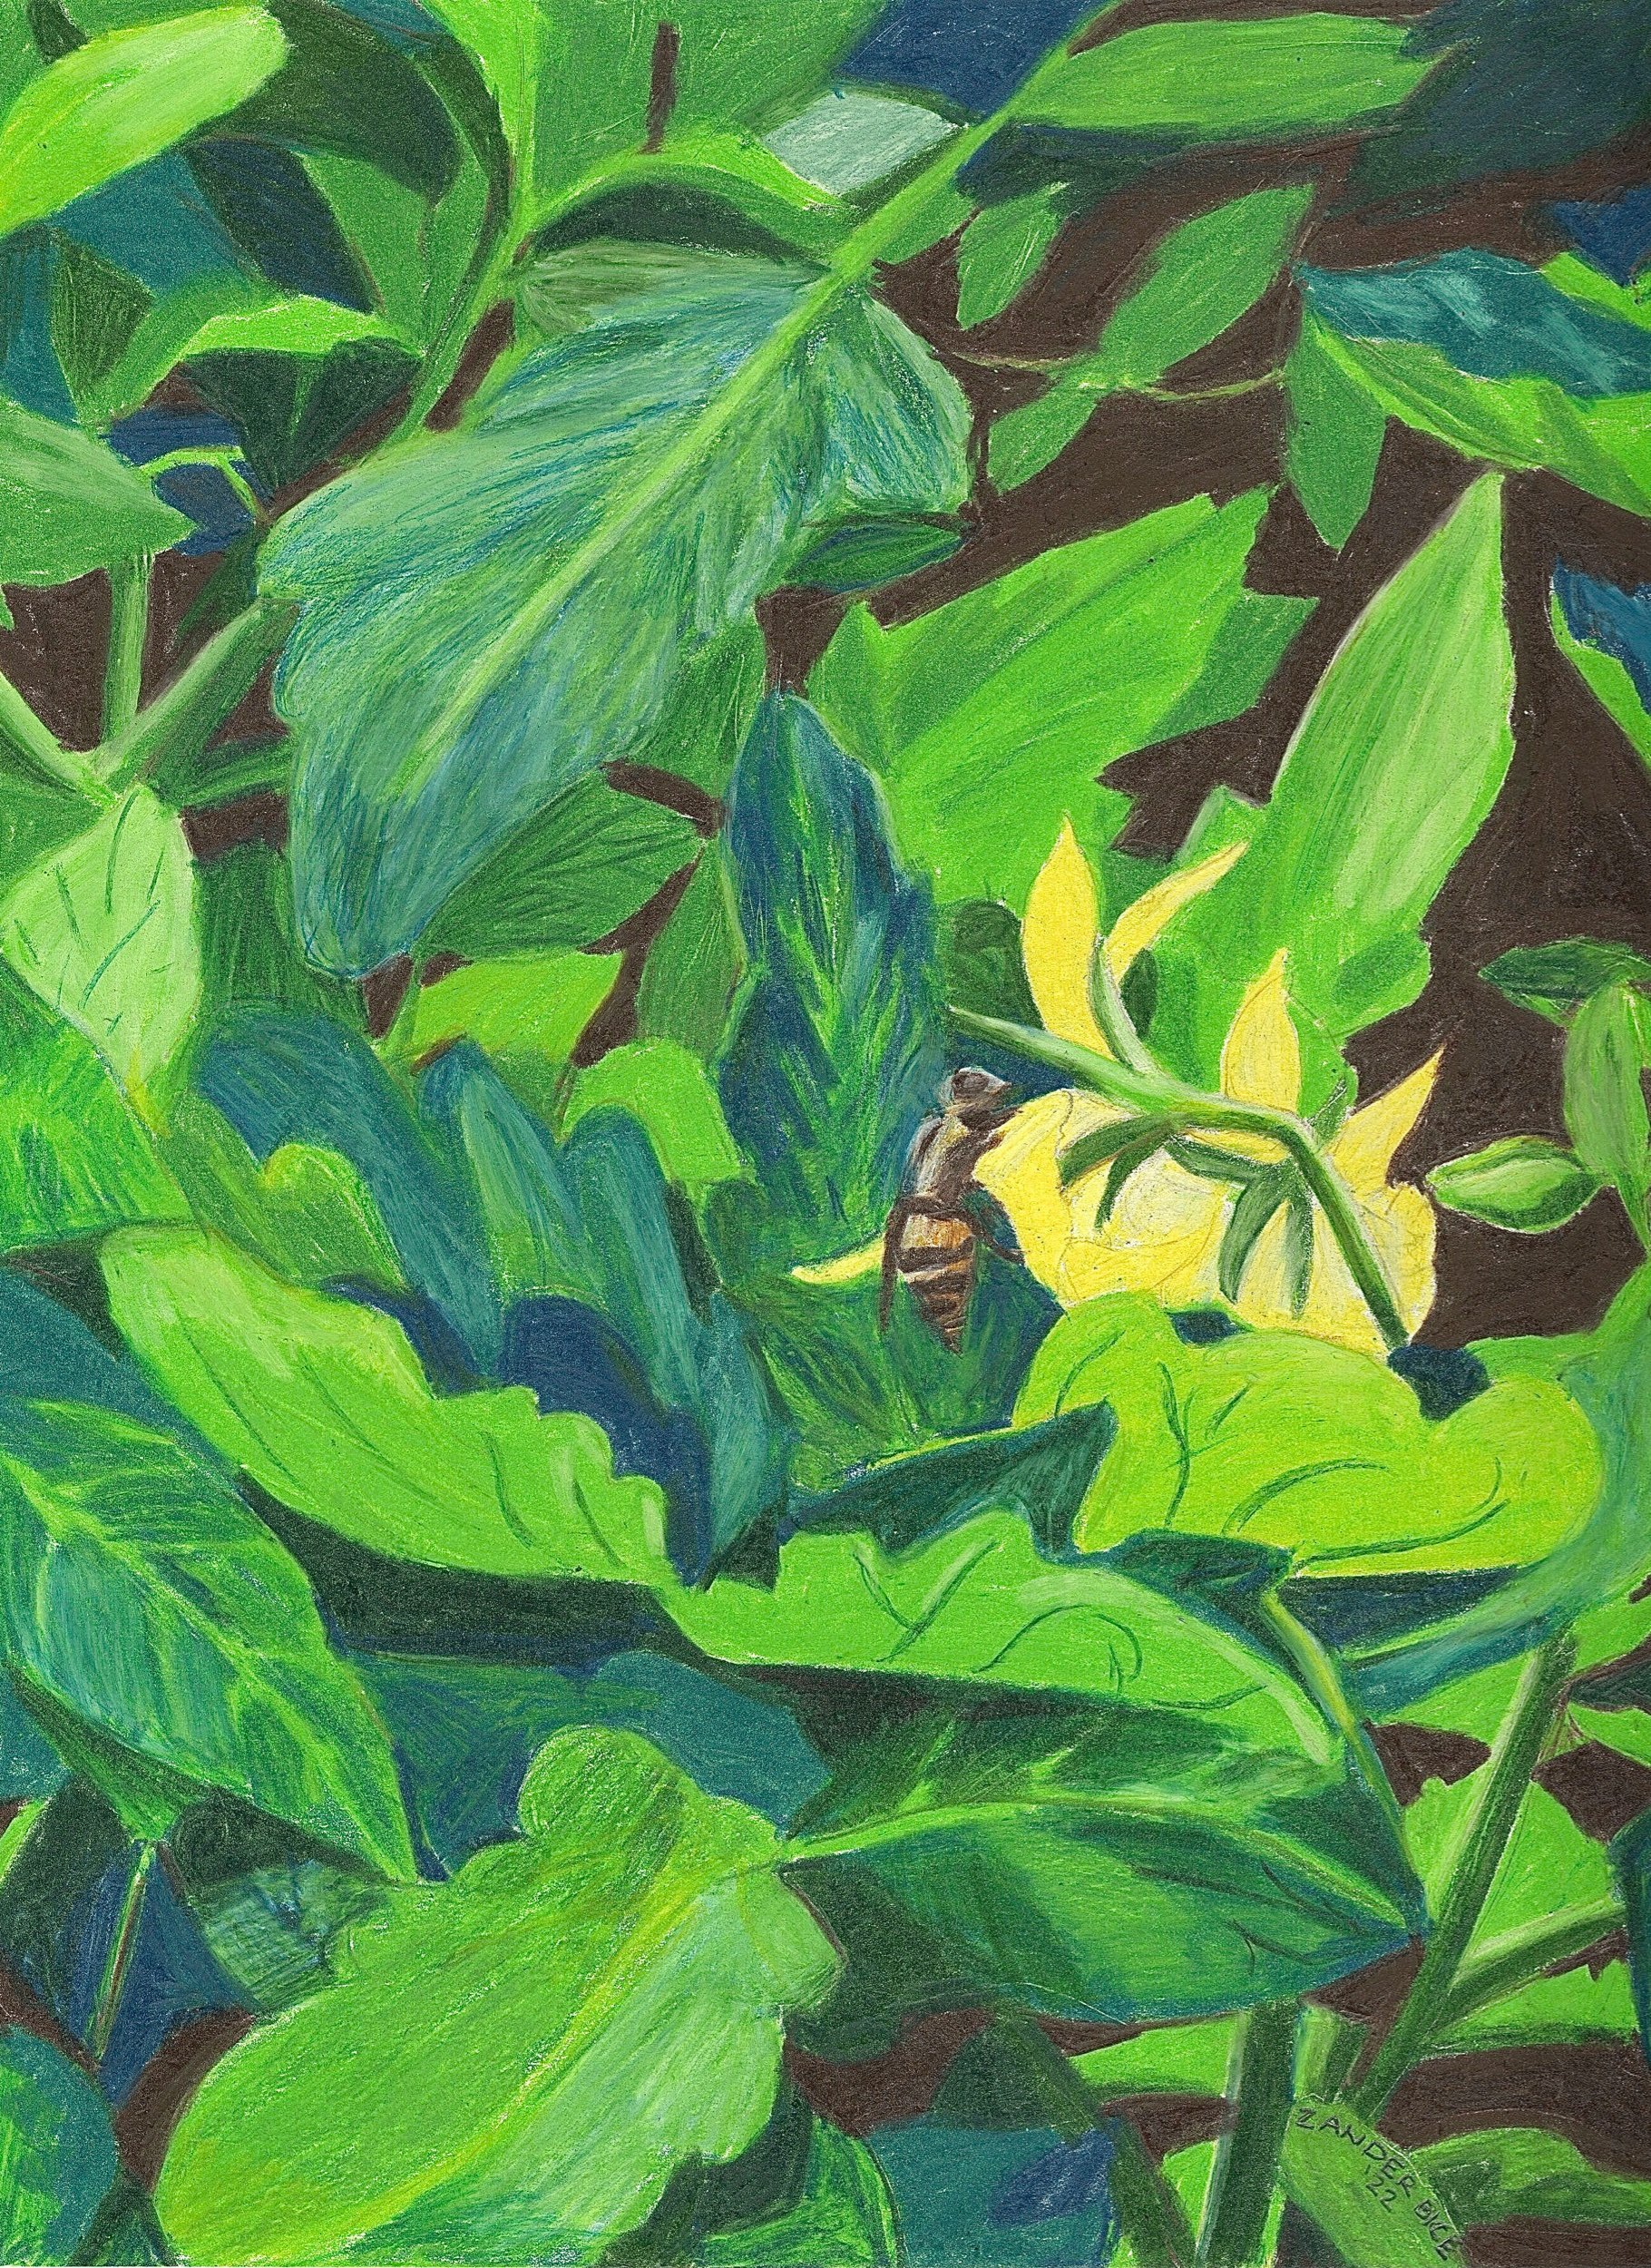 Bee and Tomato Plant, 9"x12", Colored Pencil on Paper, 2022